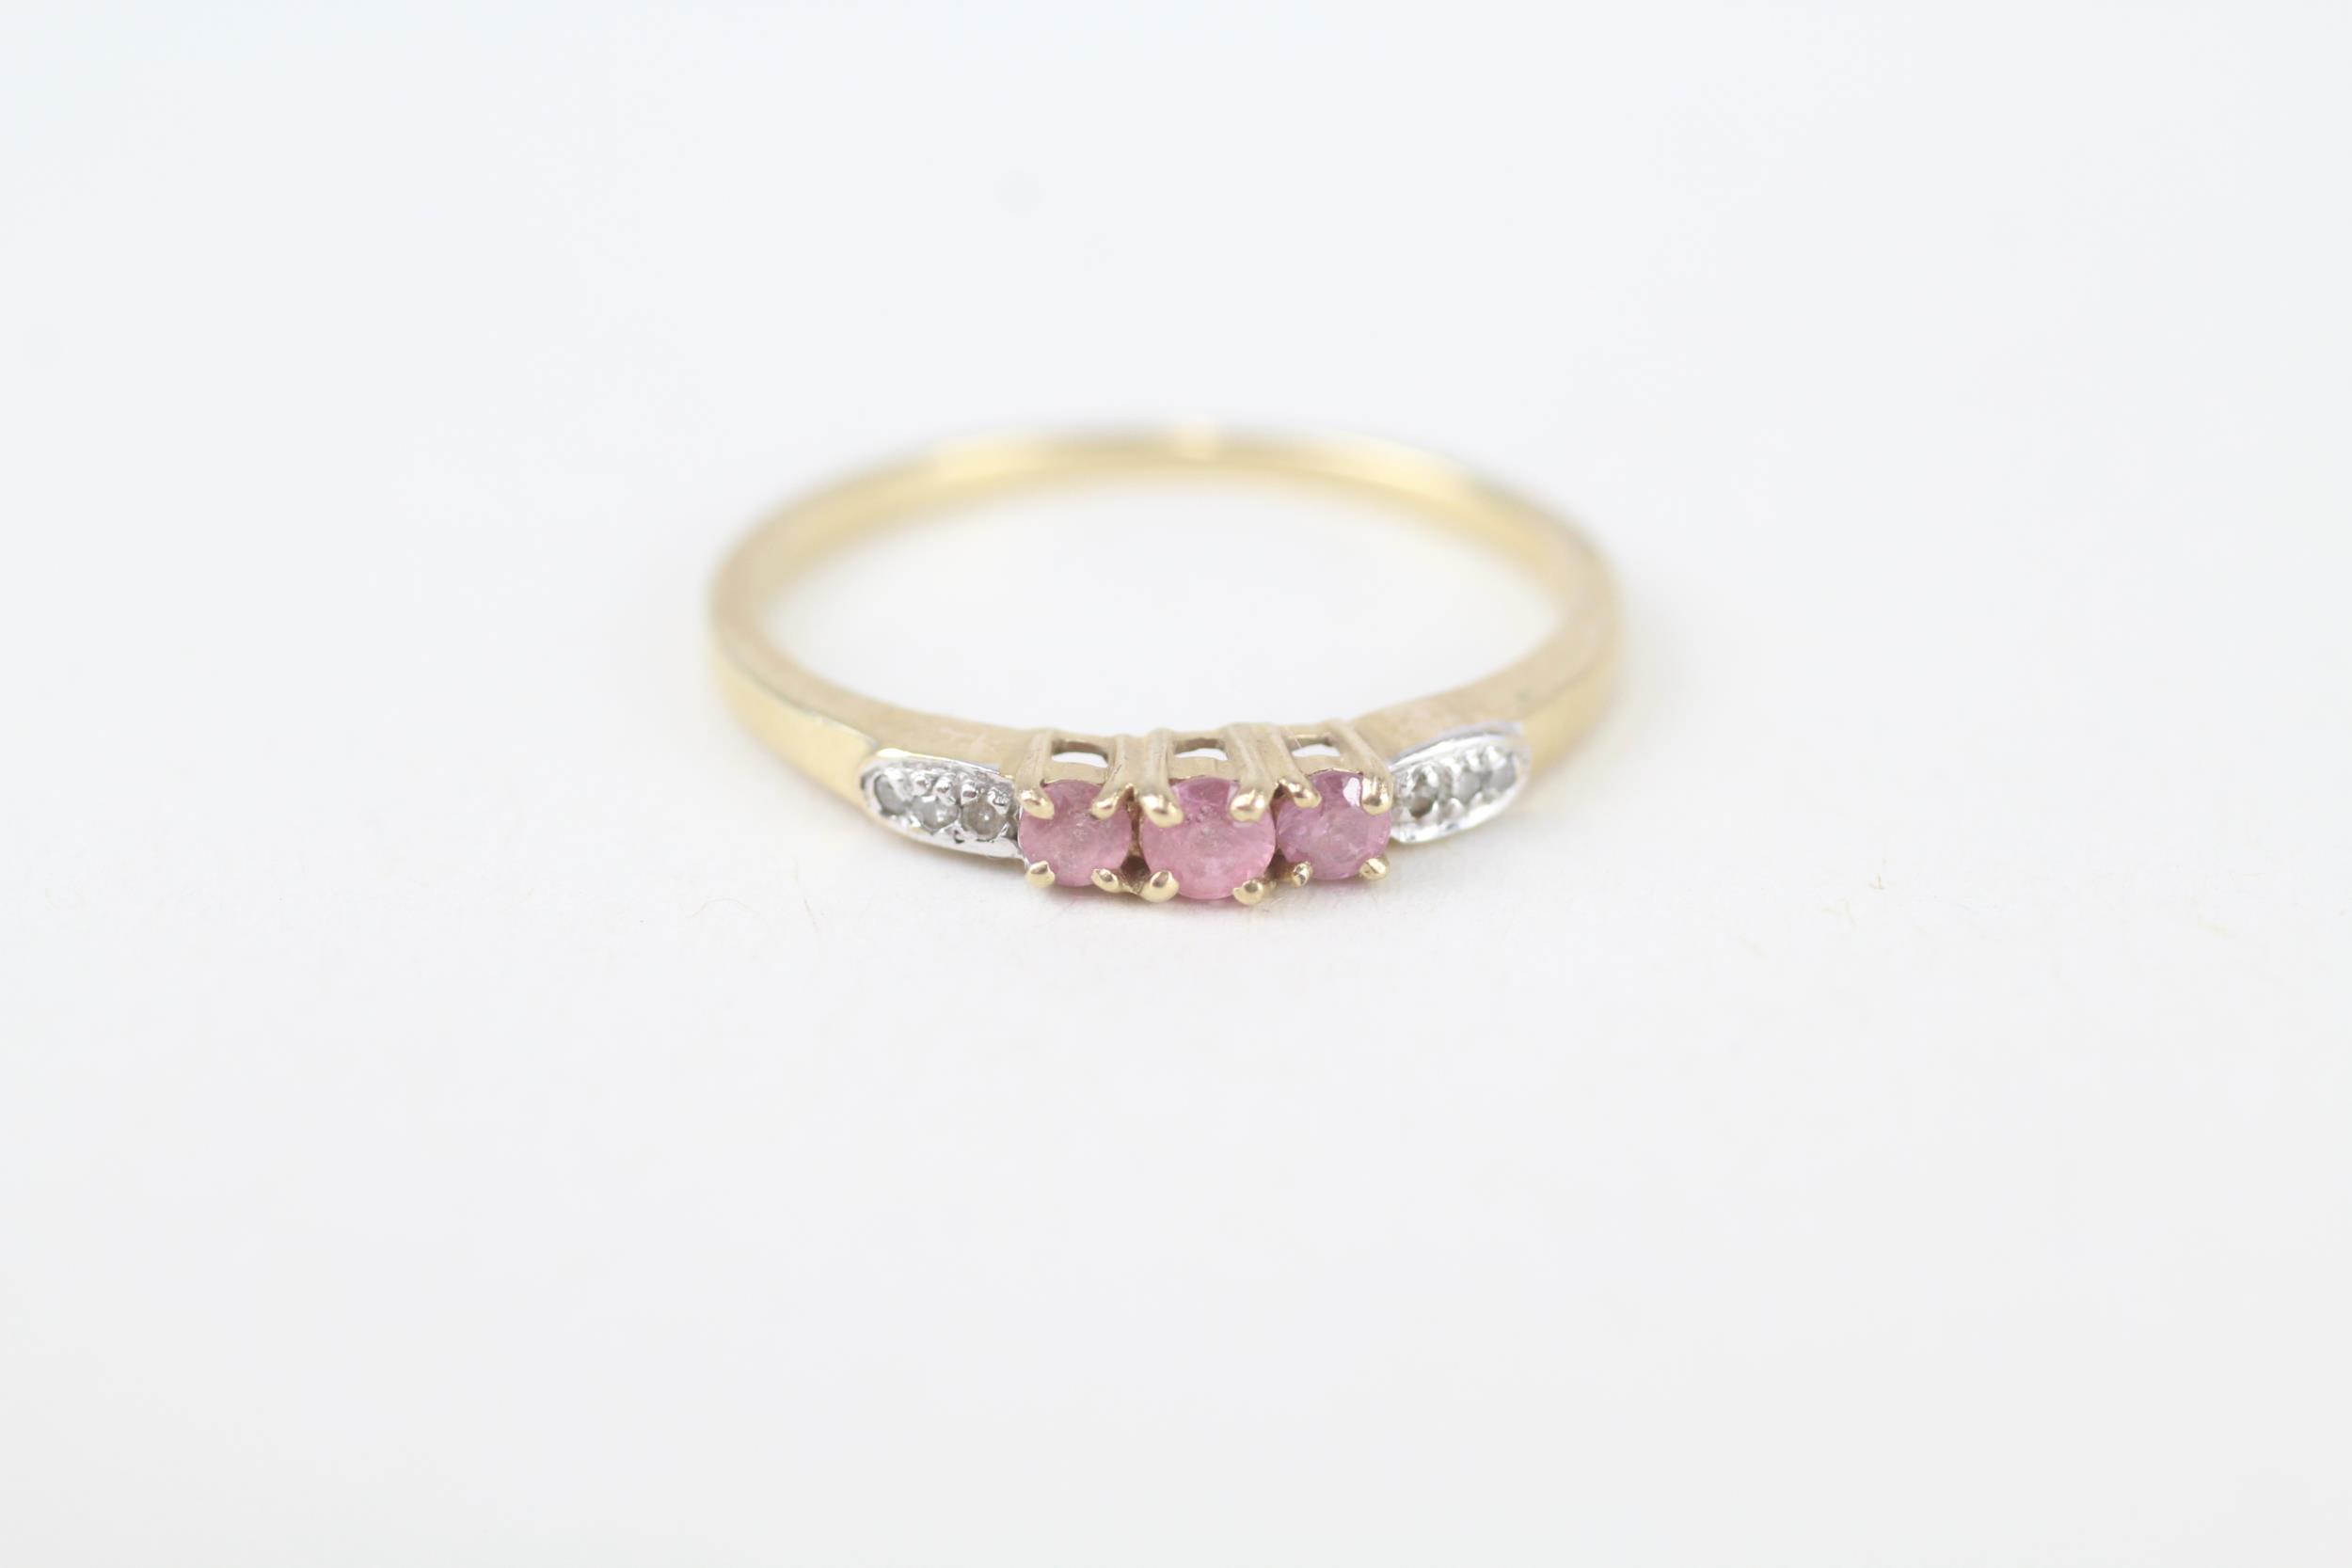 9ct gold pink diamond three stone ring with diamond sides Size N 1/2 1.2 g - Image 2 of 5